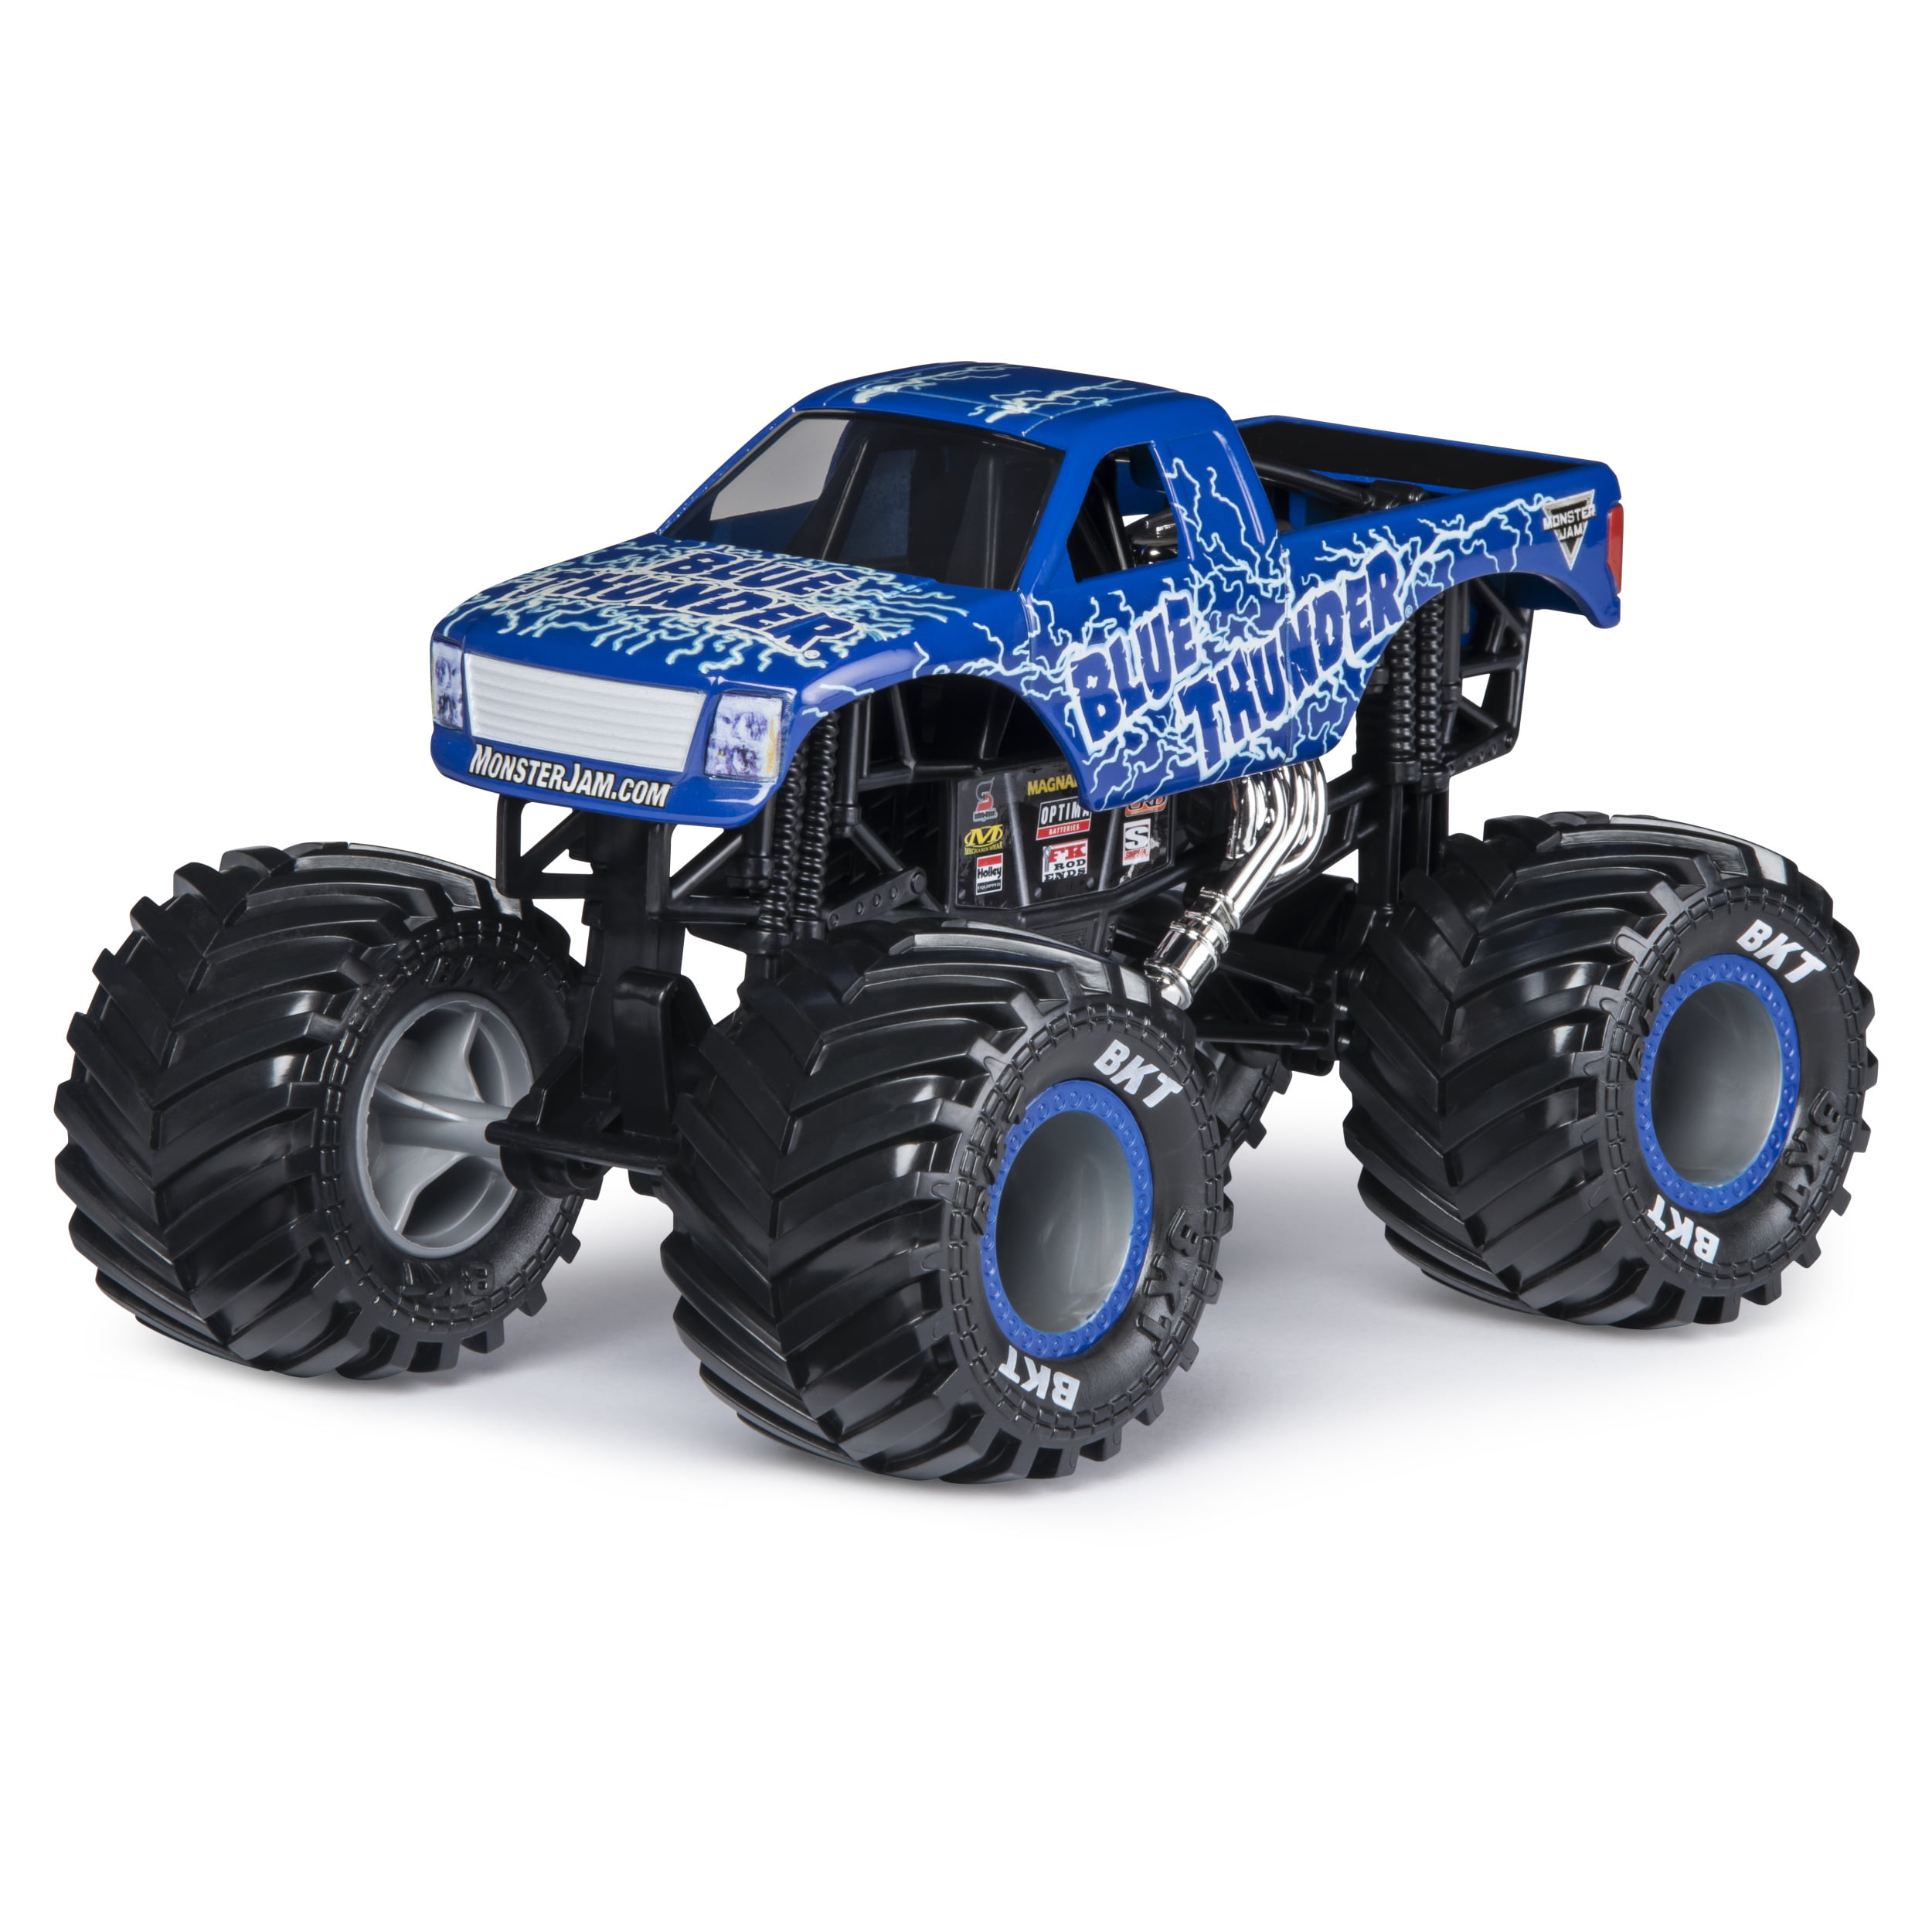 Year 2020 Monster Jam 1:24 Scale Die Cast Metal Official Truck Series -  EARTH SHAKER 20120669 with Monster Tires and Working Suspension